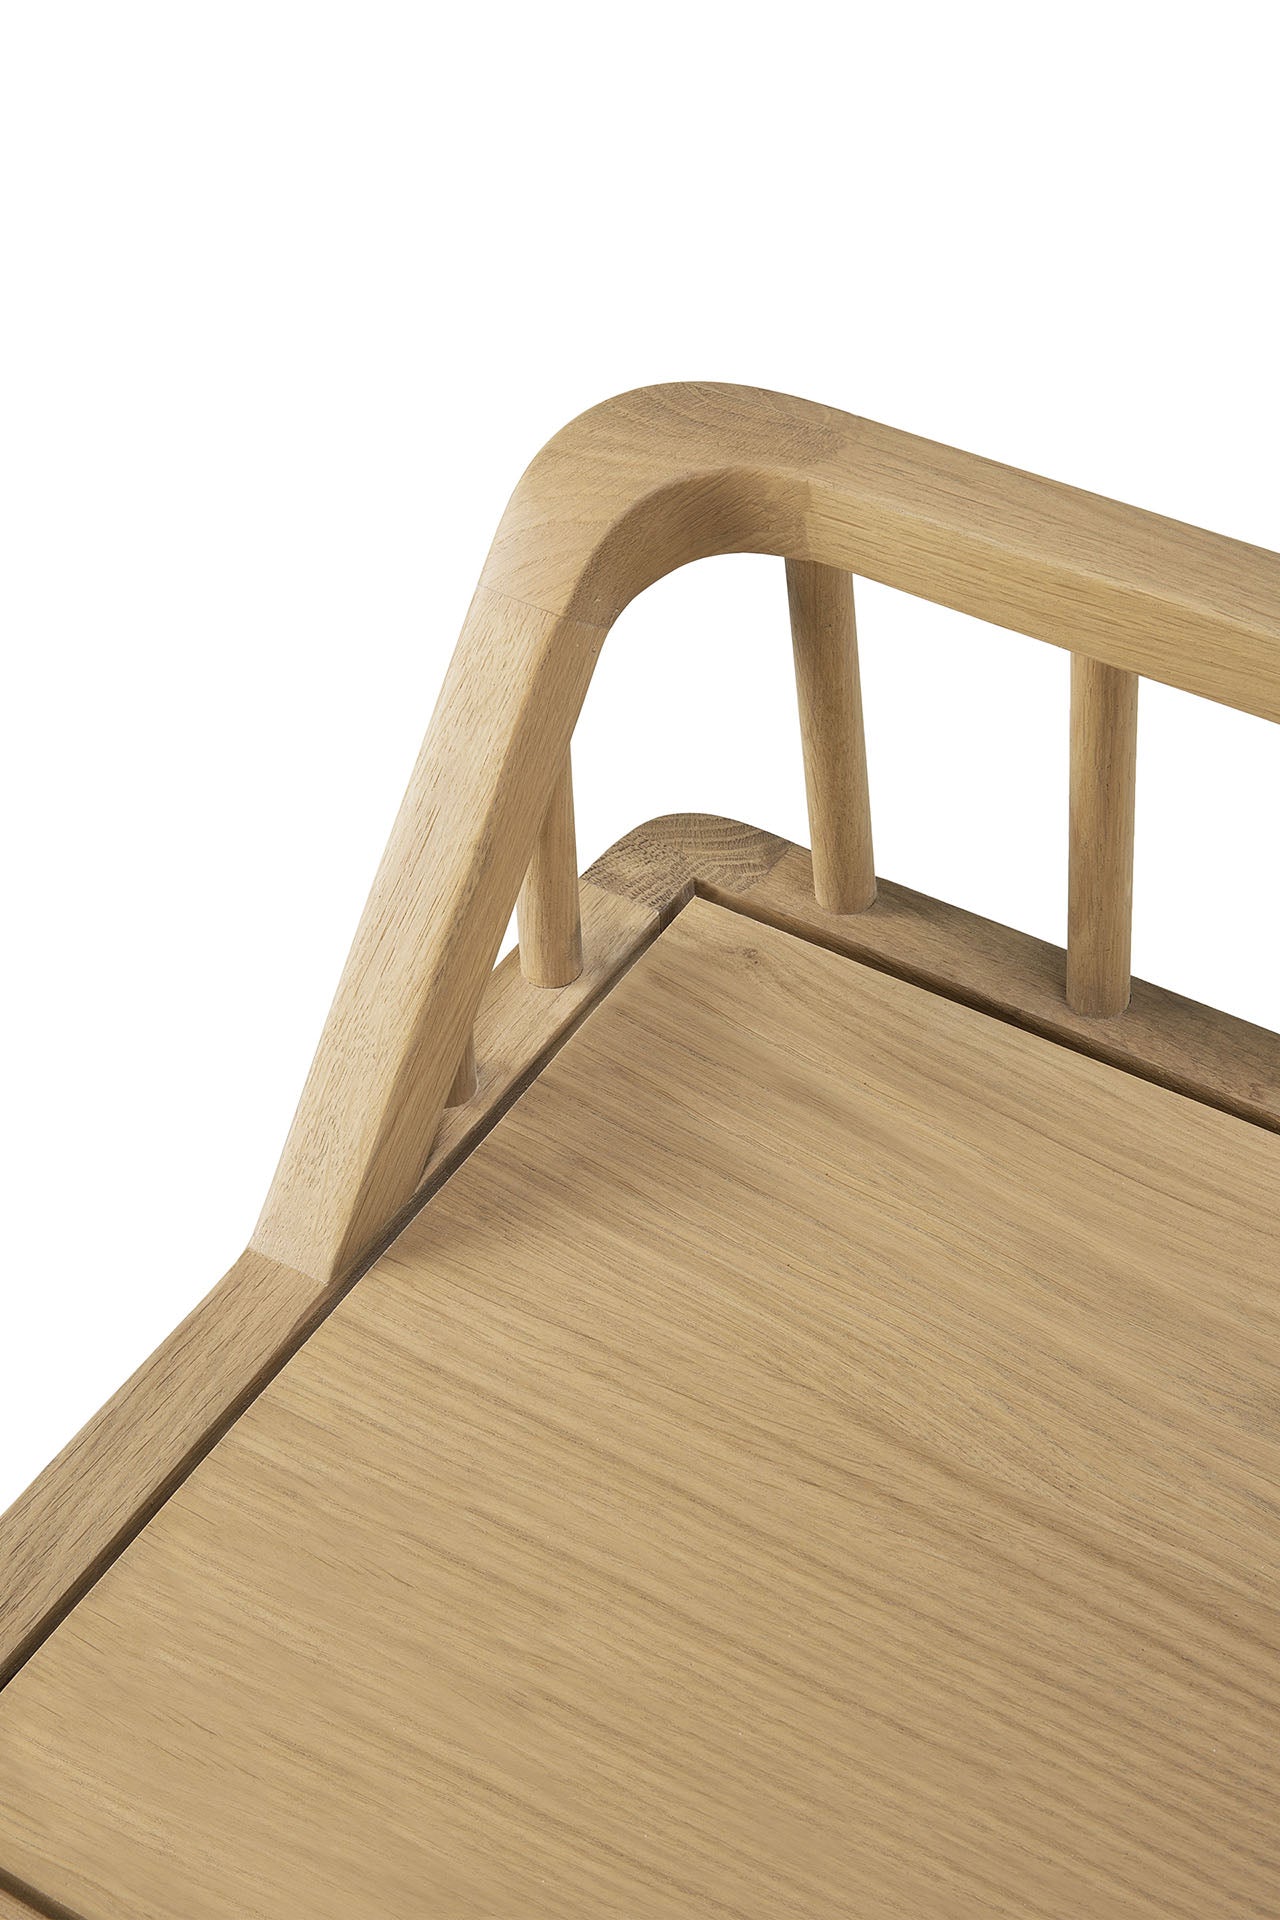 Ethnicraft Oak Spindle Bench Seat is available from Make Your House A Home, Bendigo, Victoria, Australia